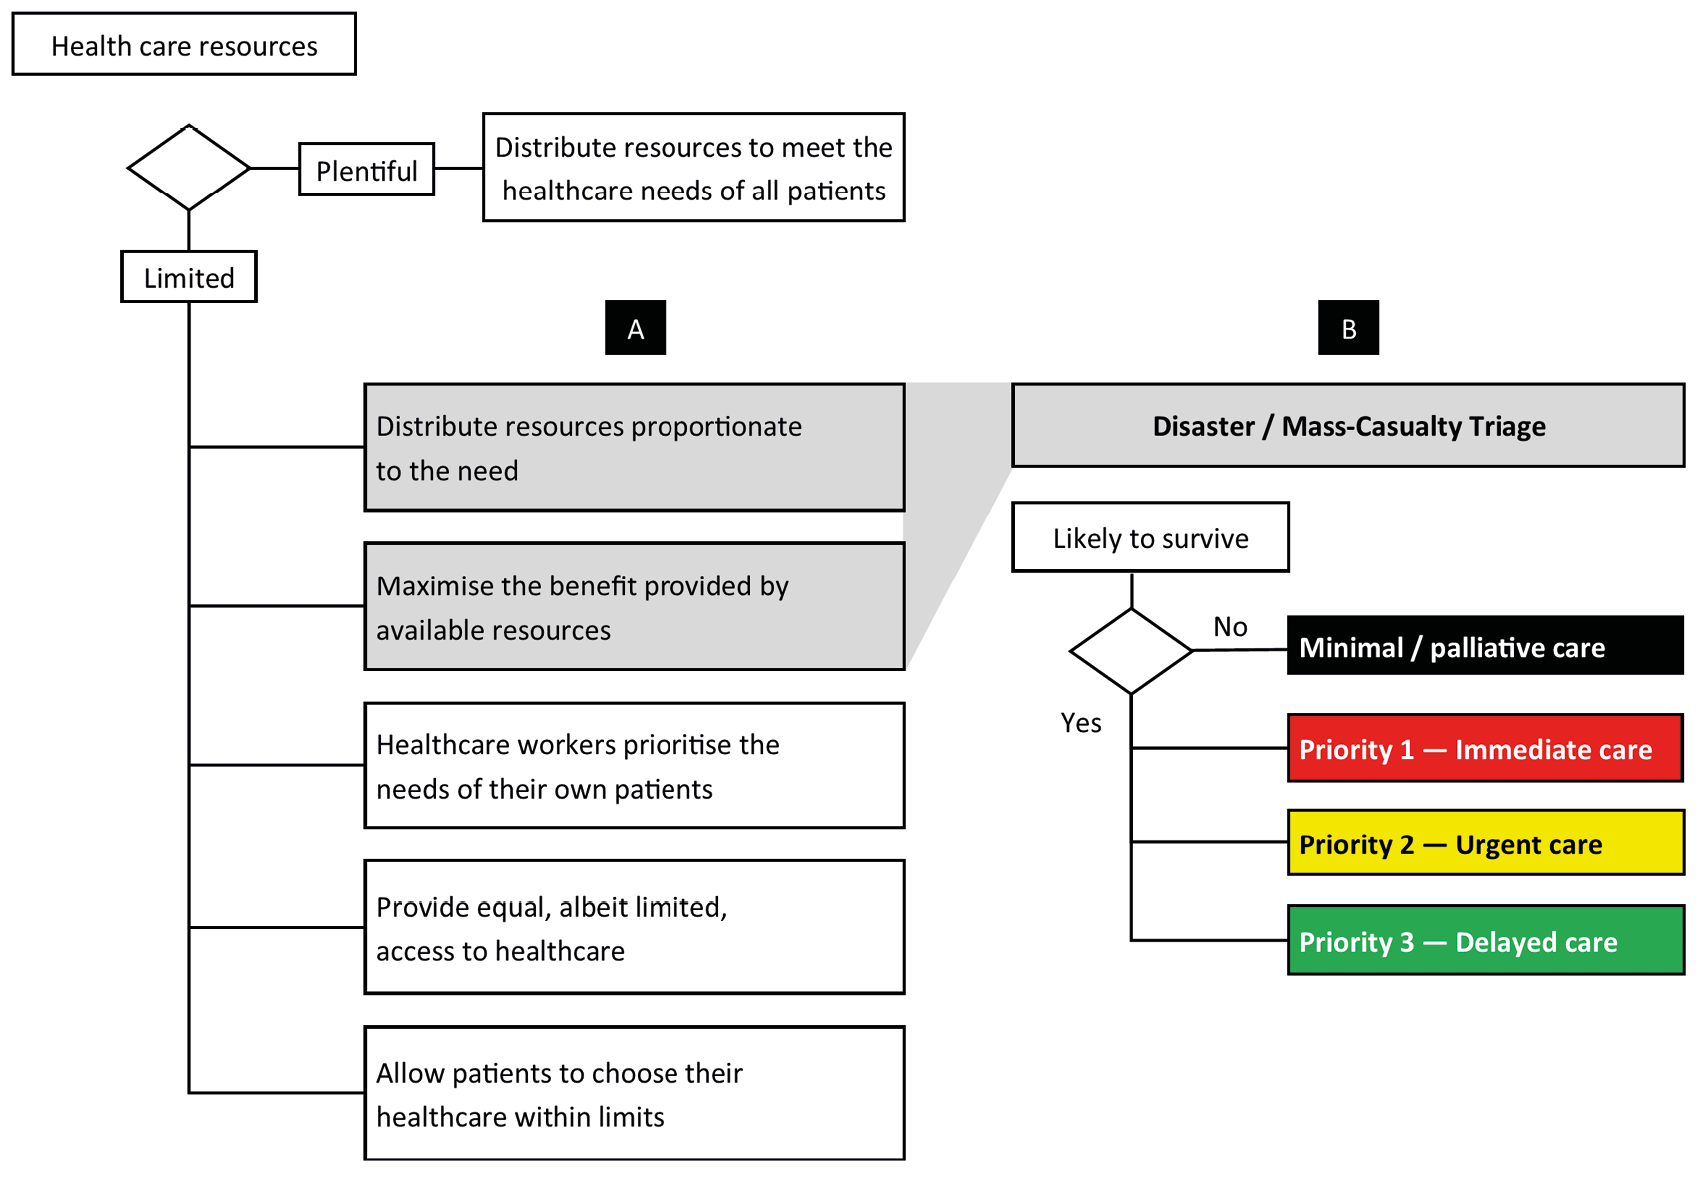 A diagram that maps out with flow chart symbols the overall ethical framework for the provision of care in resource-constrained healthcare settings and during mass casualty events.